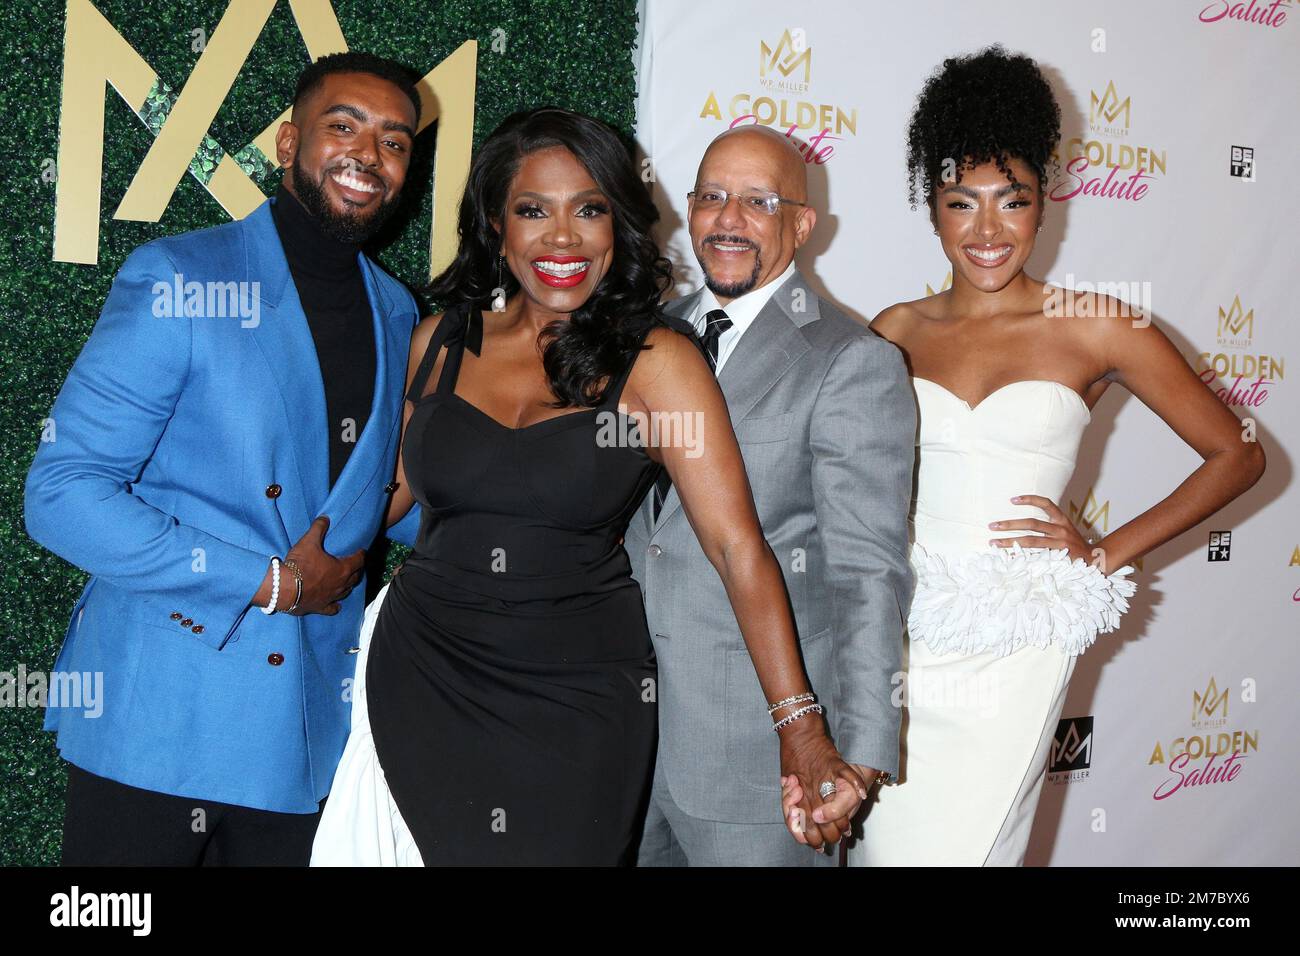 January 8, 2023, Marina Del Rey, CA, USA: LOS ANGELES - JAN 8:  Etienne Maurice, Sheryl Lee Ralph, Vincent Hughes,Â Ivy-Victoria Maurice at A Golden Salute to Sheryl Lee Ralph and Niecy Nash-Betts at the Ritz Carlton Hotel on January 8, 2023 in Marina Del Rey, CA (Credit Image: © Kay Blake/ZUMA Press Wire) Stock Photo